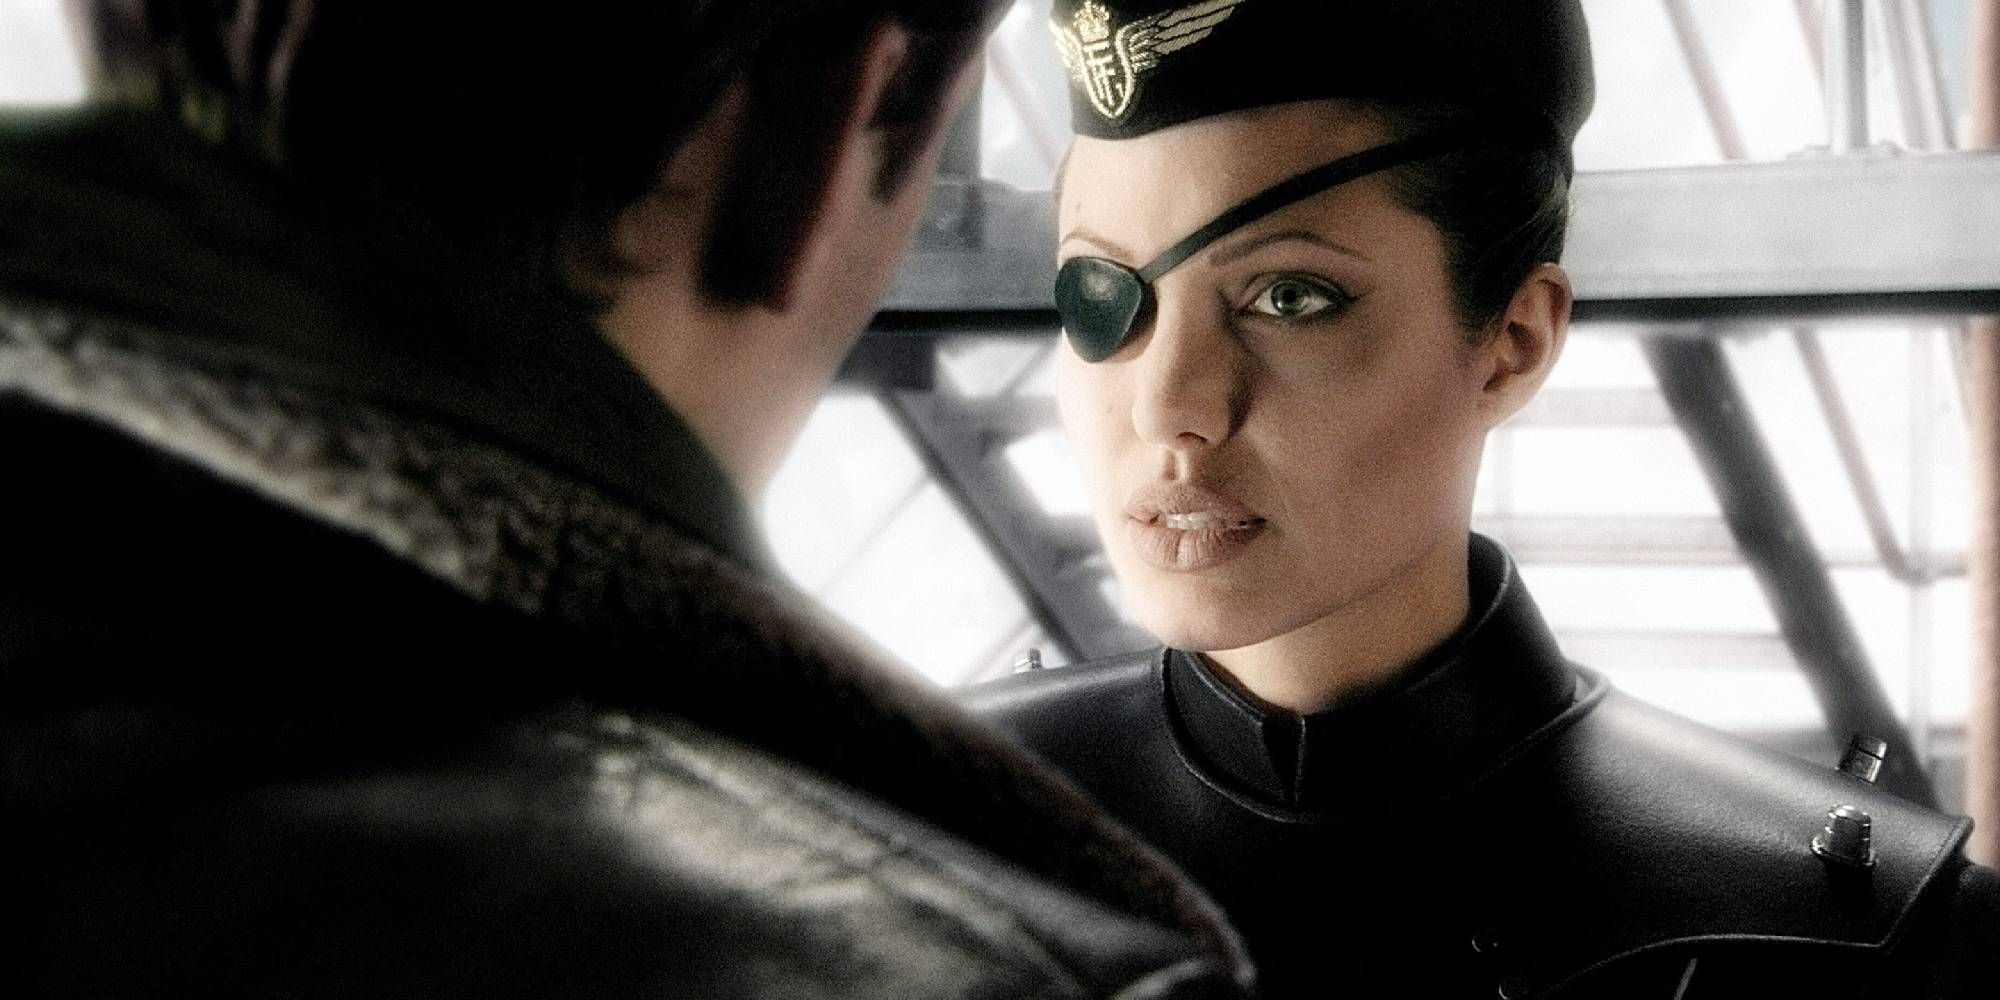 Sky Captain and the World of Tomorrow (2004) starring: Angelina